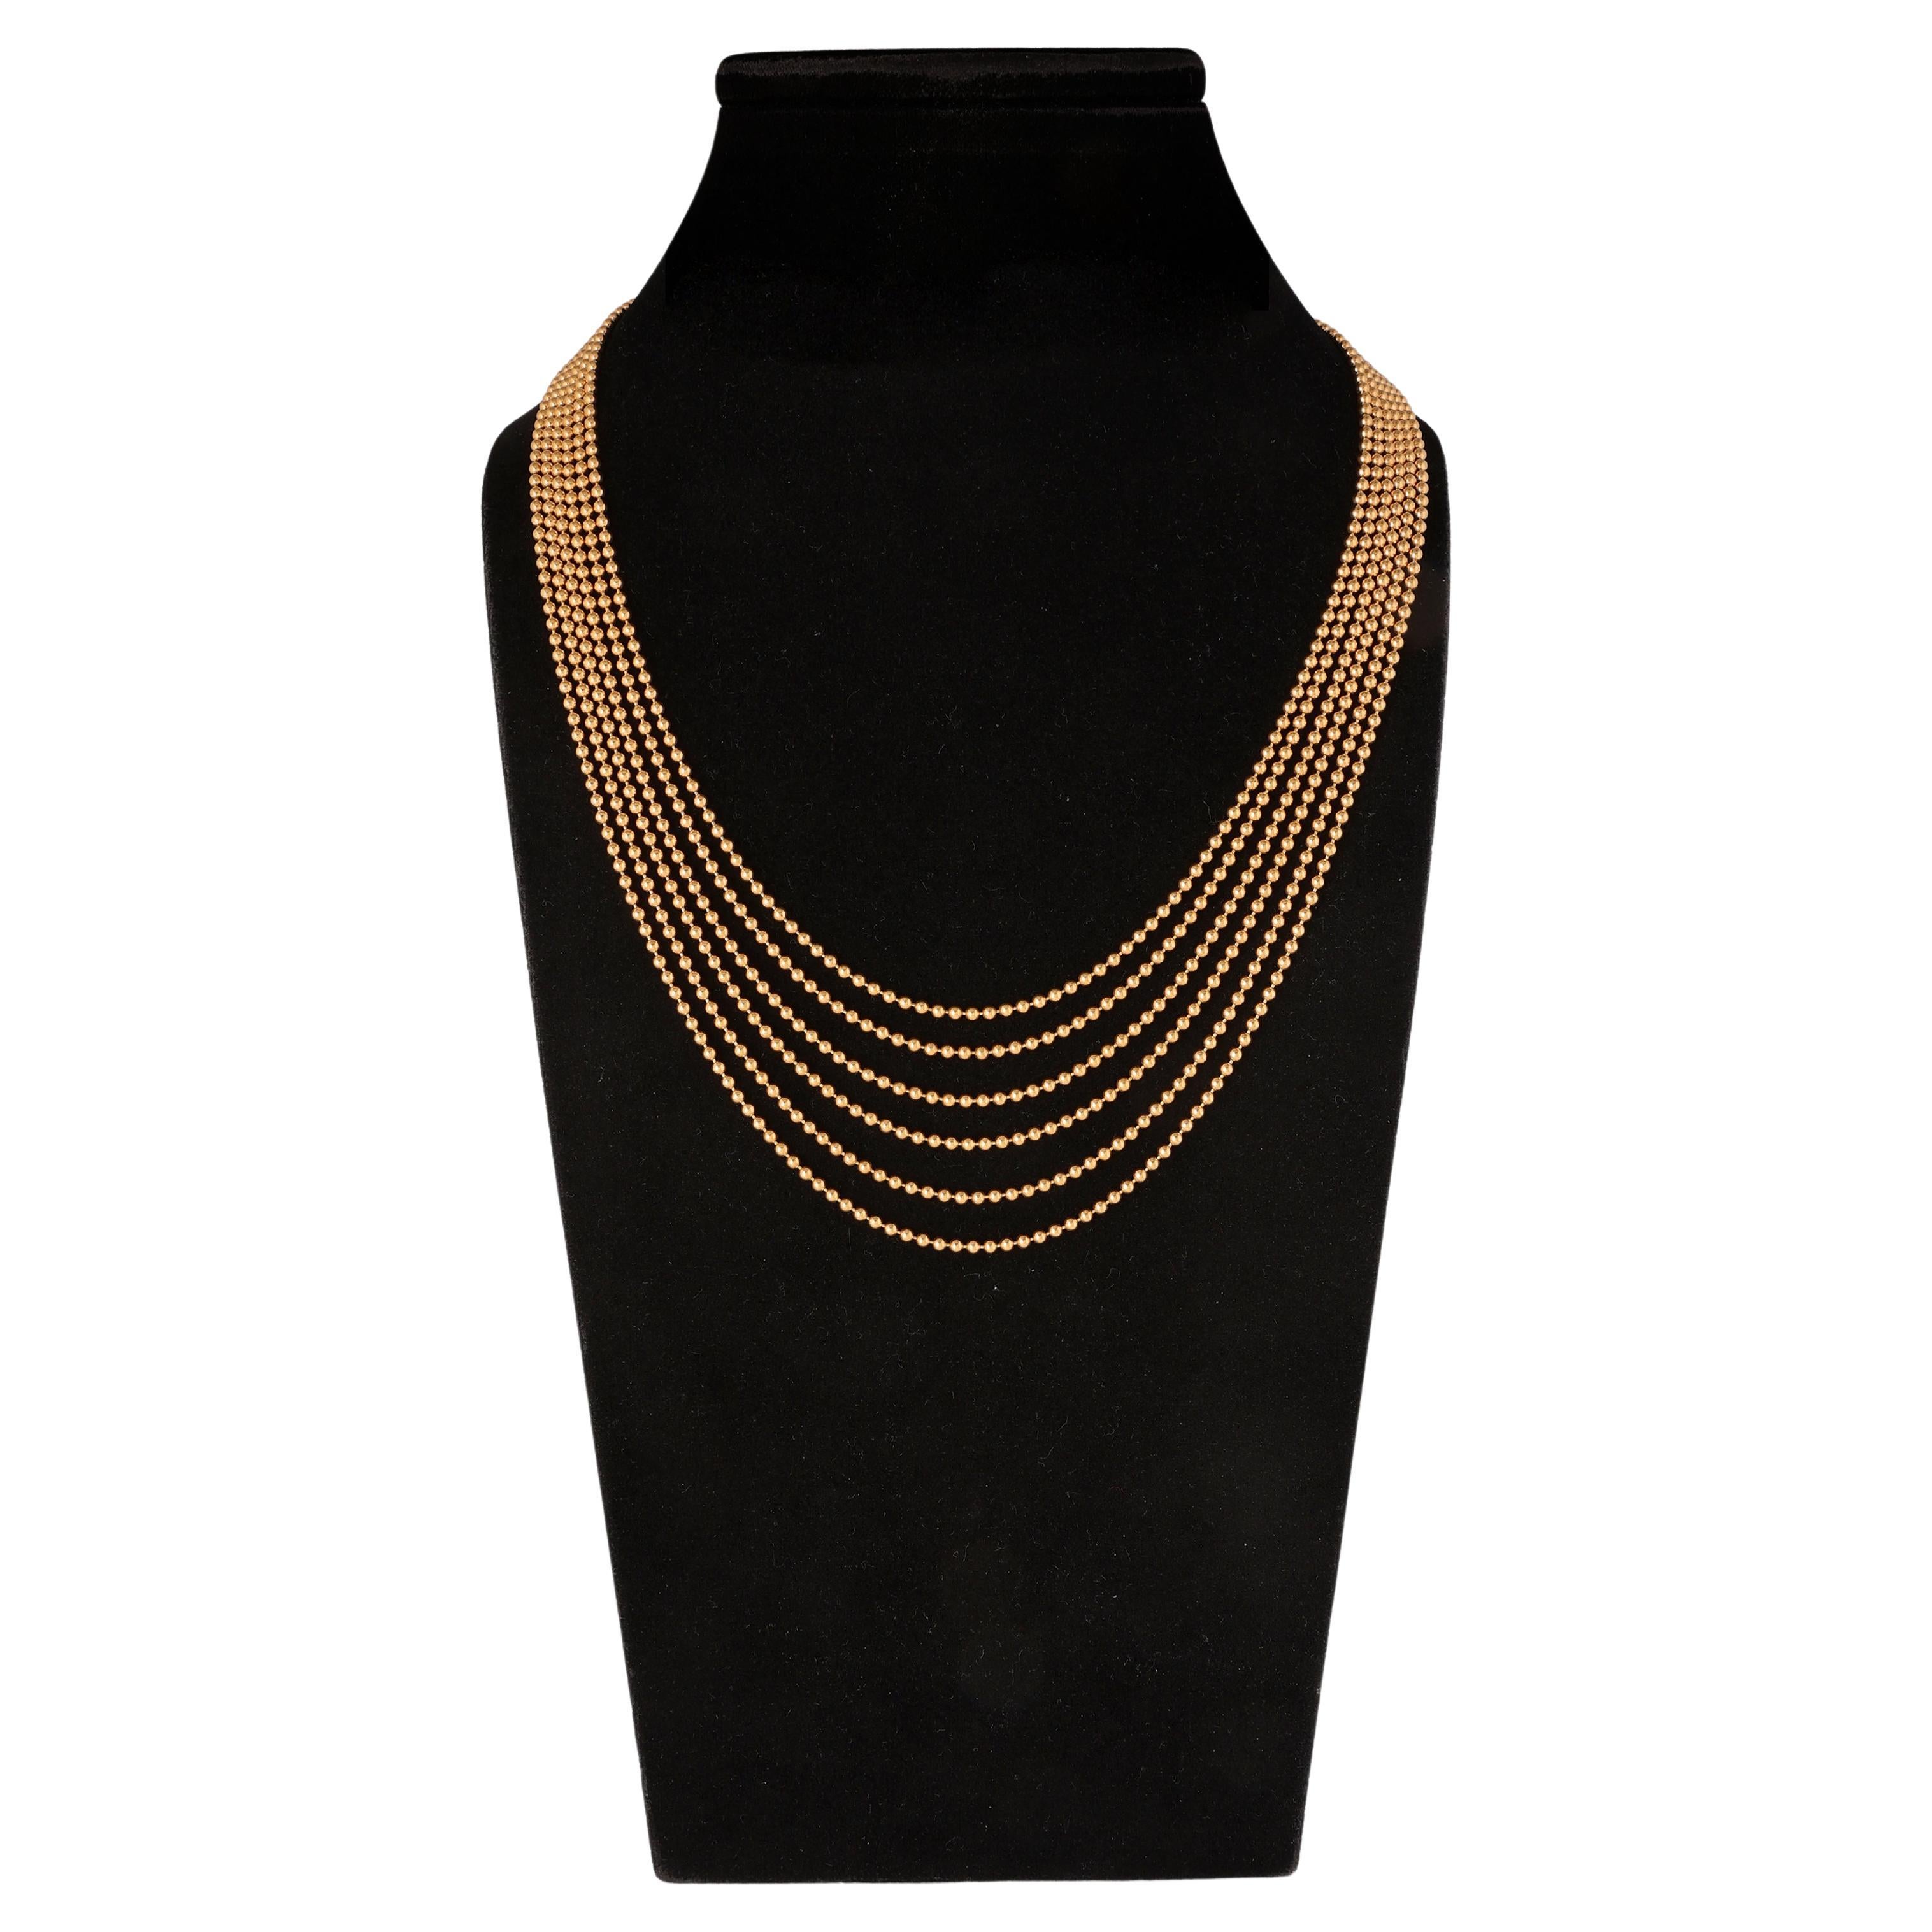 This beautiful waterfall necklace by Cartier from their 'Draperie De Décolleté' collection dresses the neckline in a bold and elegant way. The piece is masterfully crafted from high polish 18 carat yellow gold and showcases 6 strands of slender ball